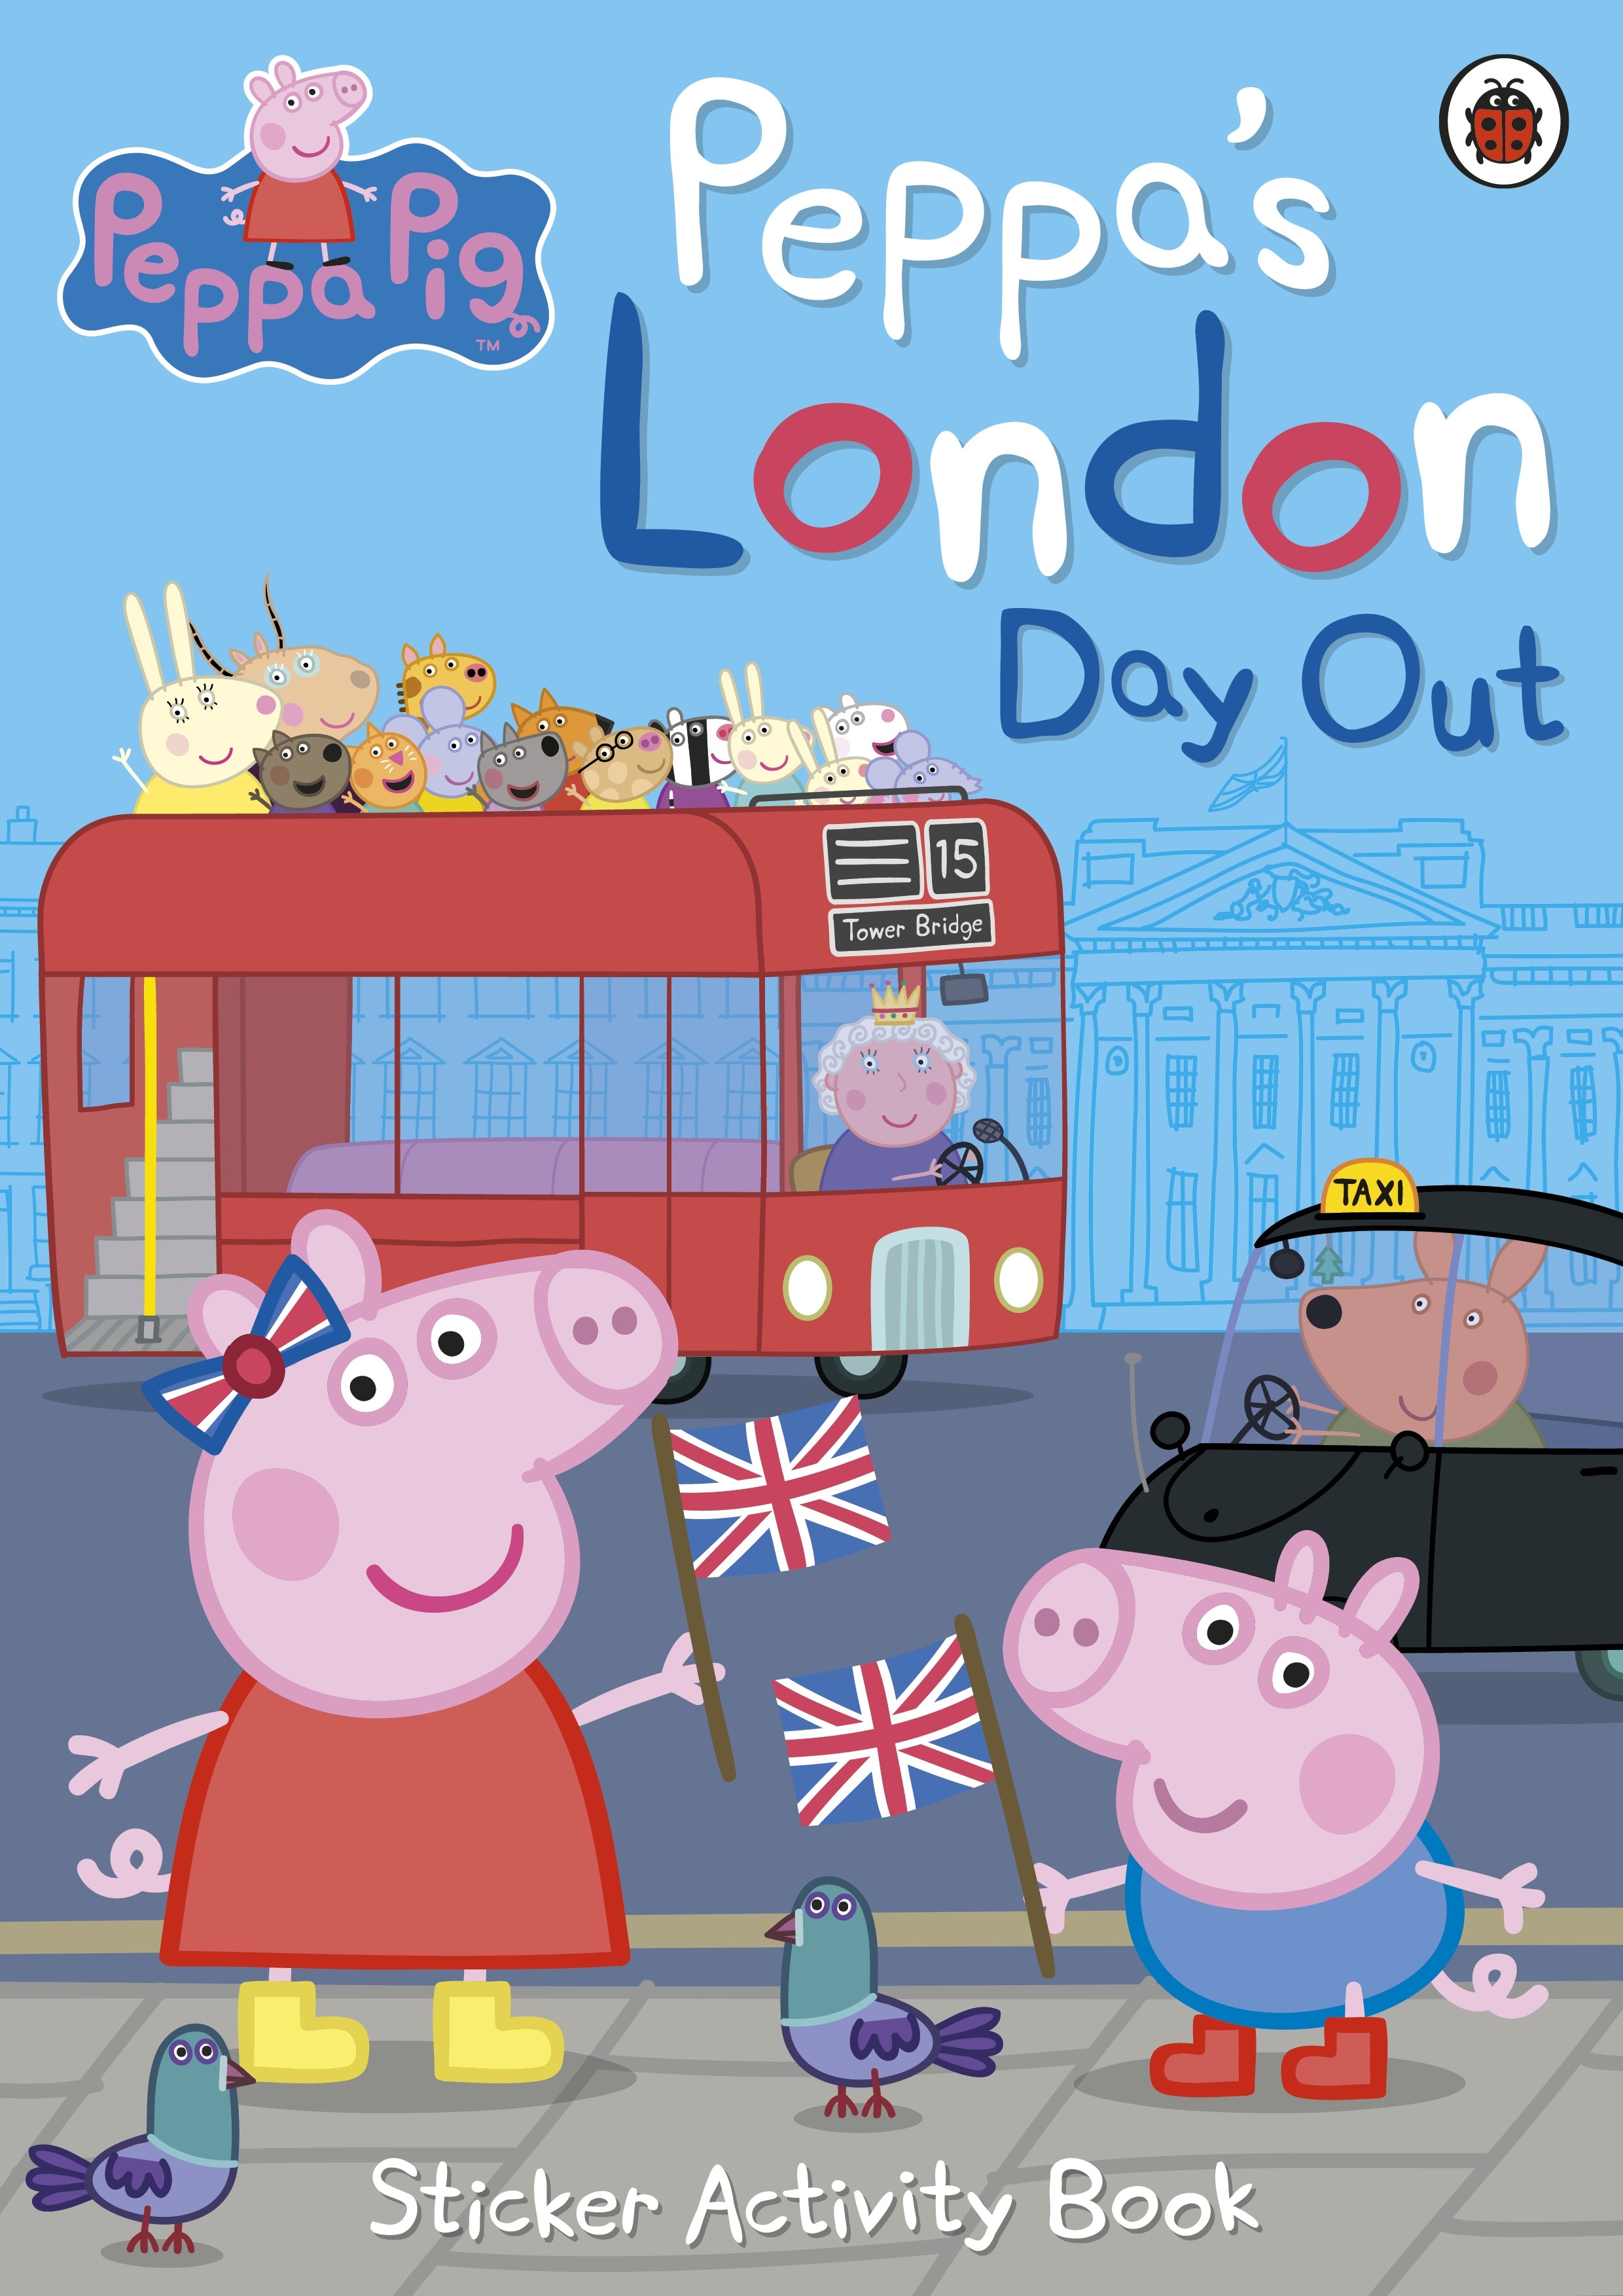 Book “Peppa Pig: Peppa's London Day Out Sticker Activity Book” by Peppa Pig — April 6, 2017